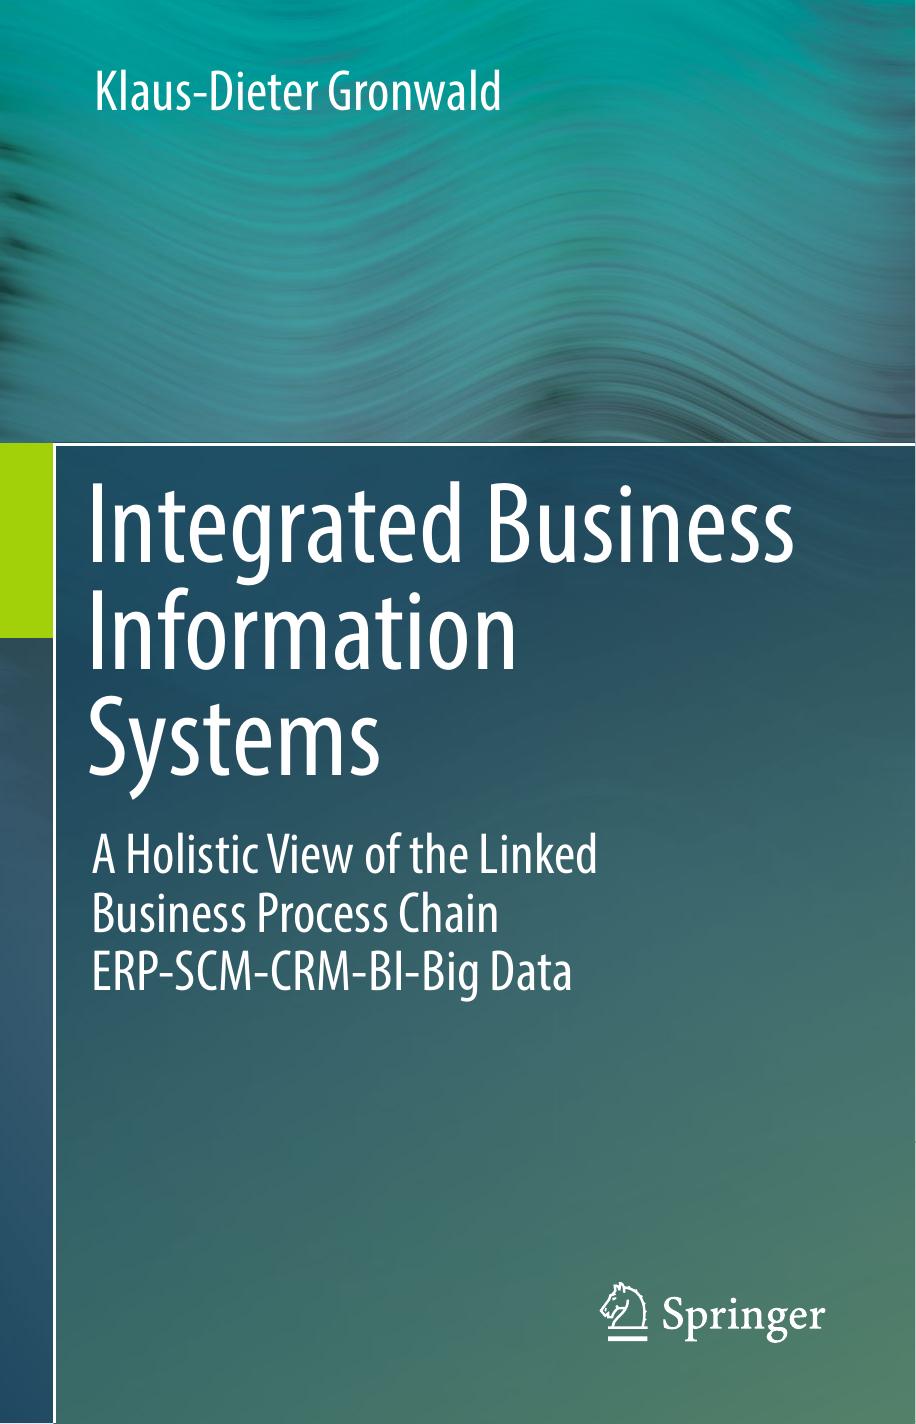 Integrated Business Information Systems,  2018